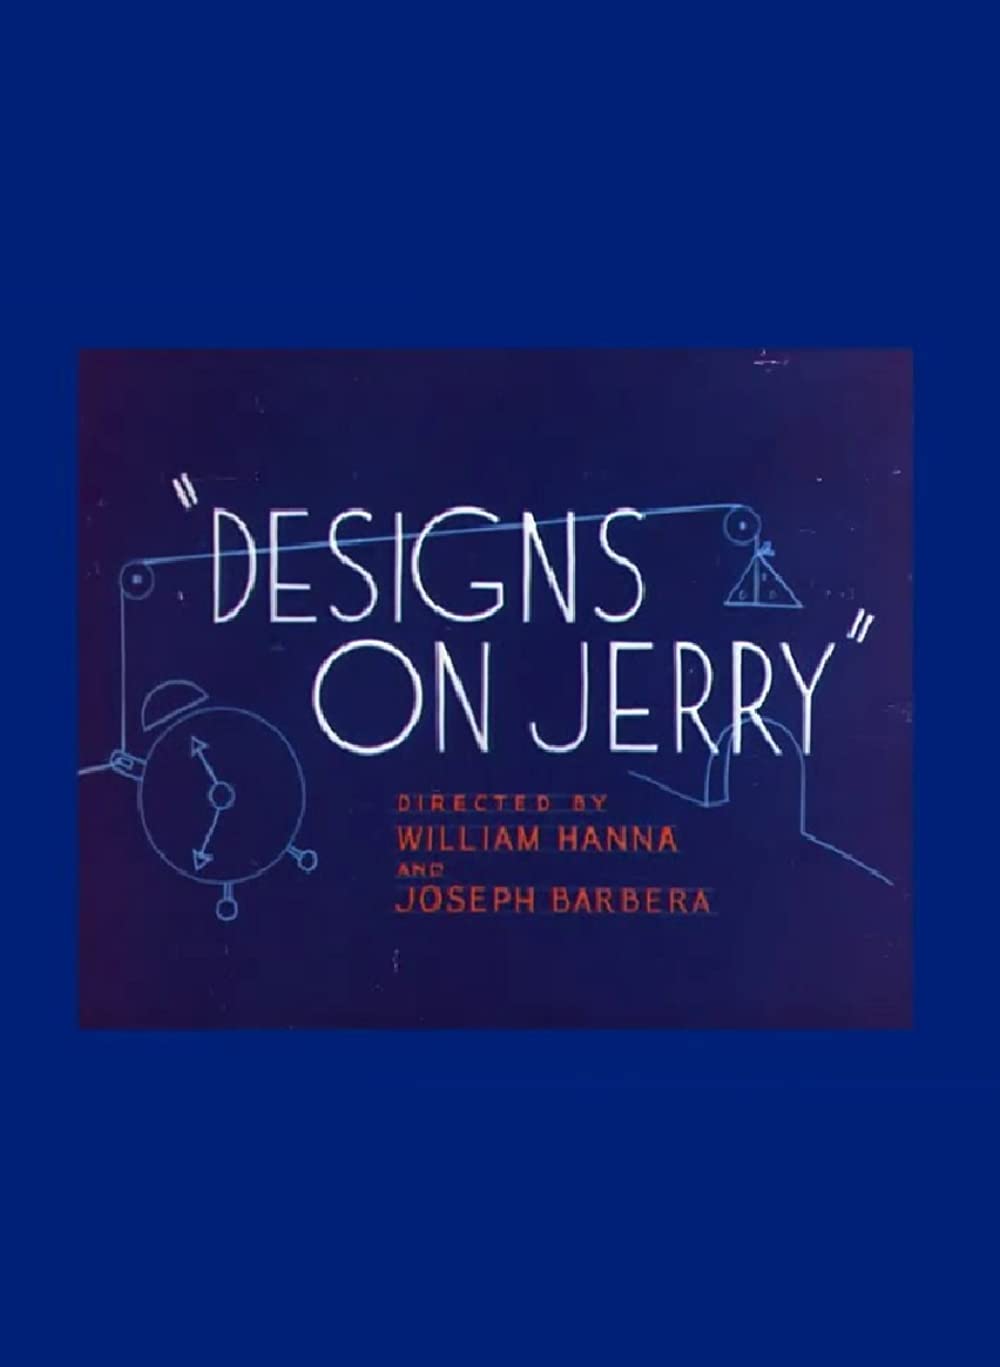 Designs on Jerry (Short 1955)